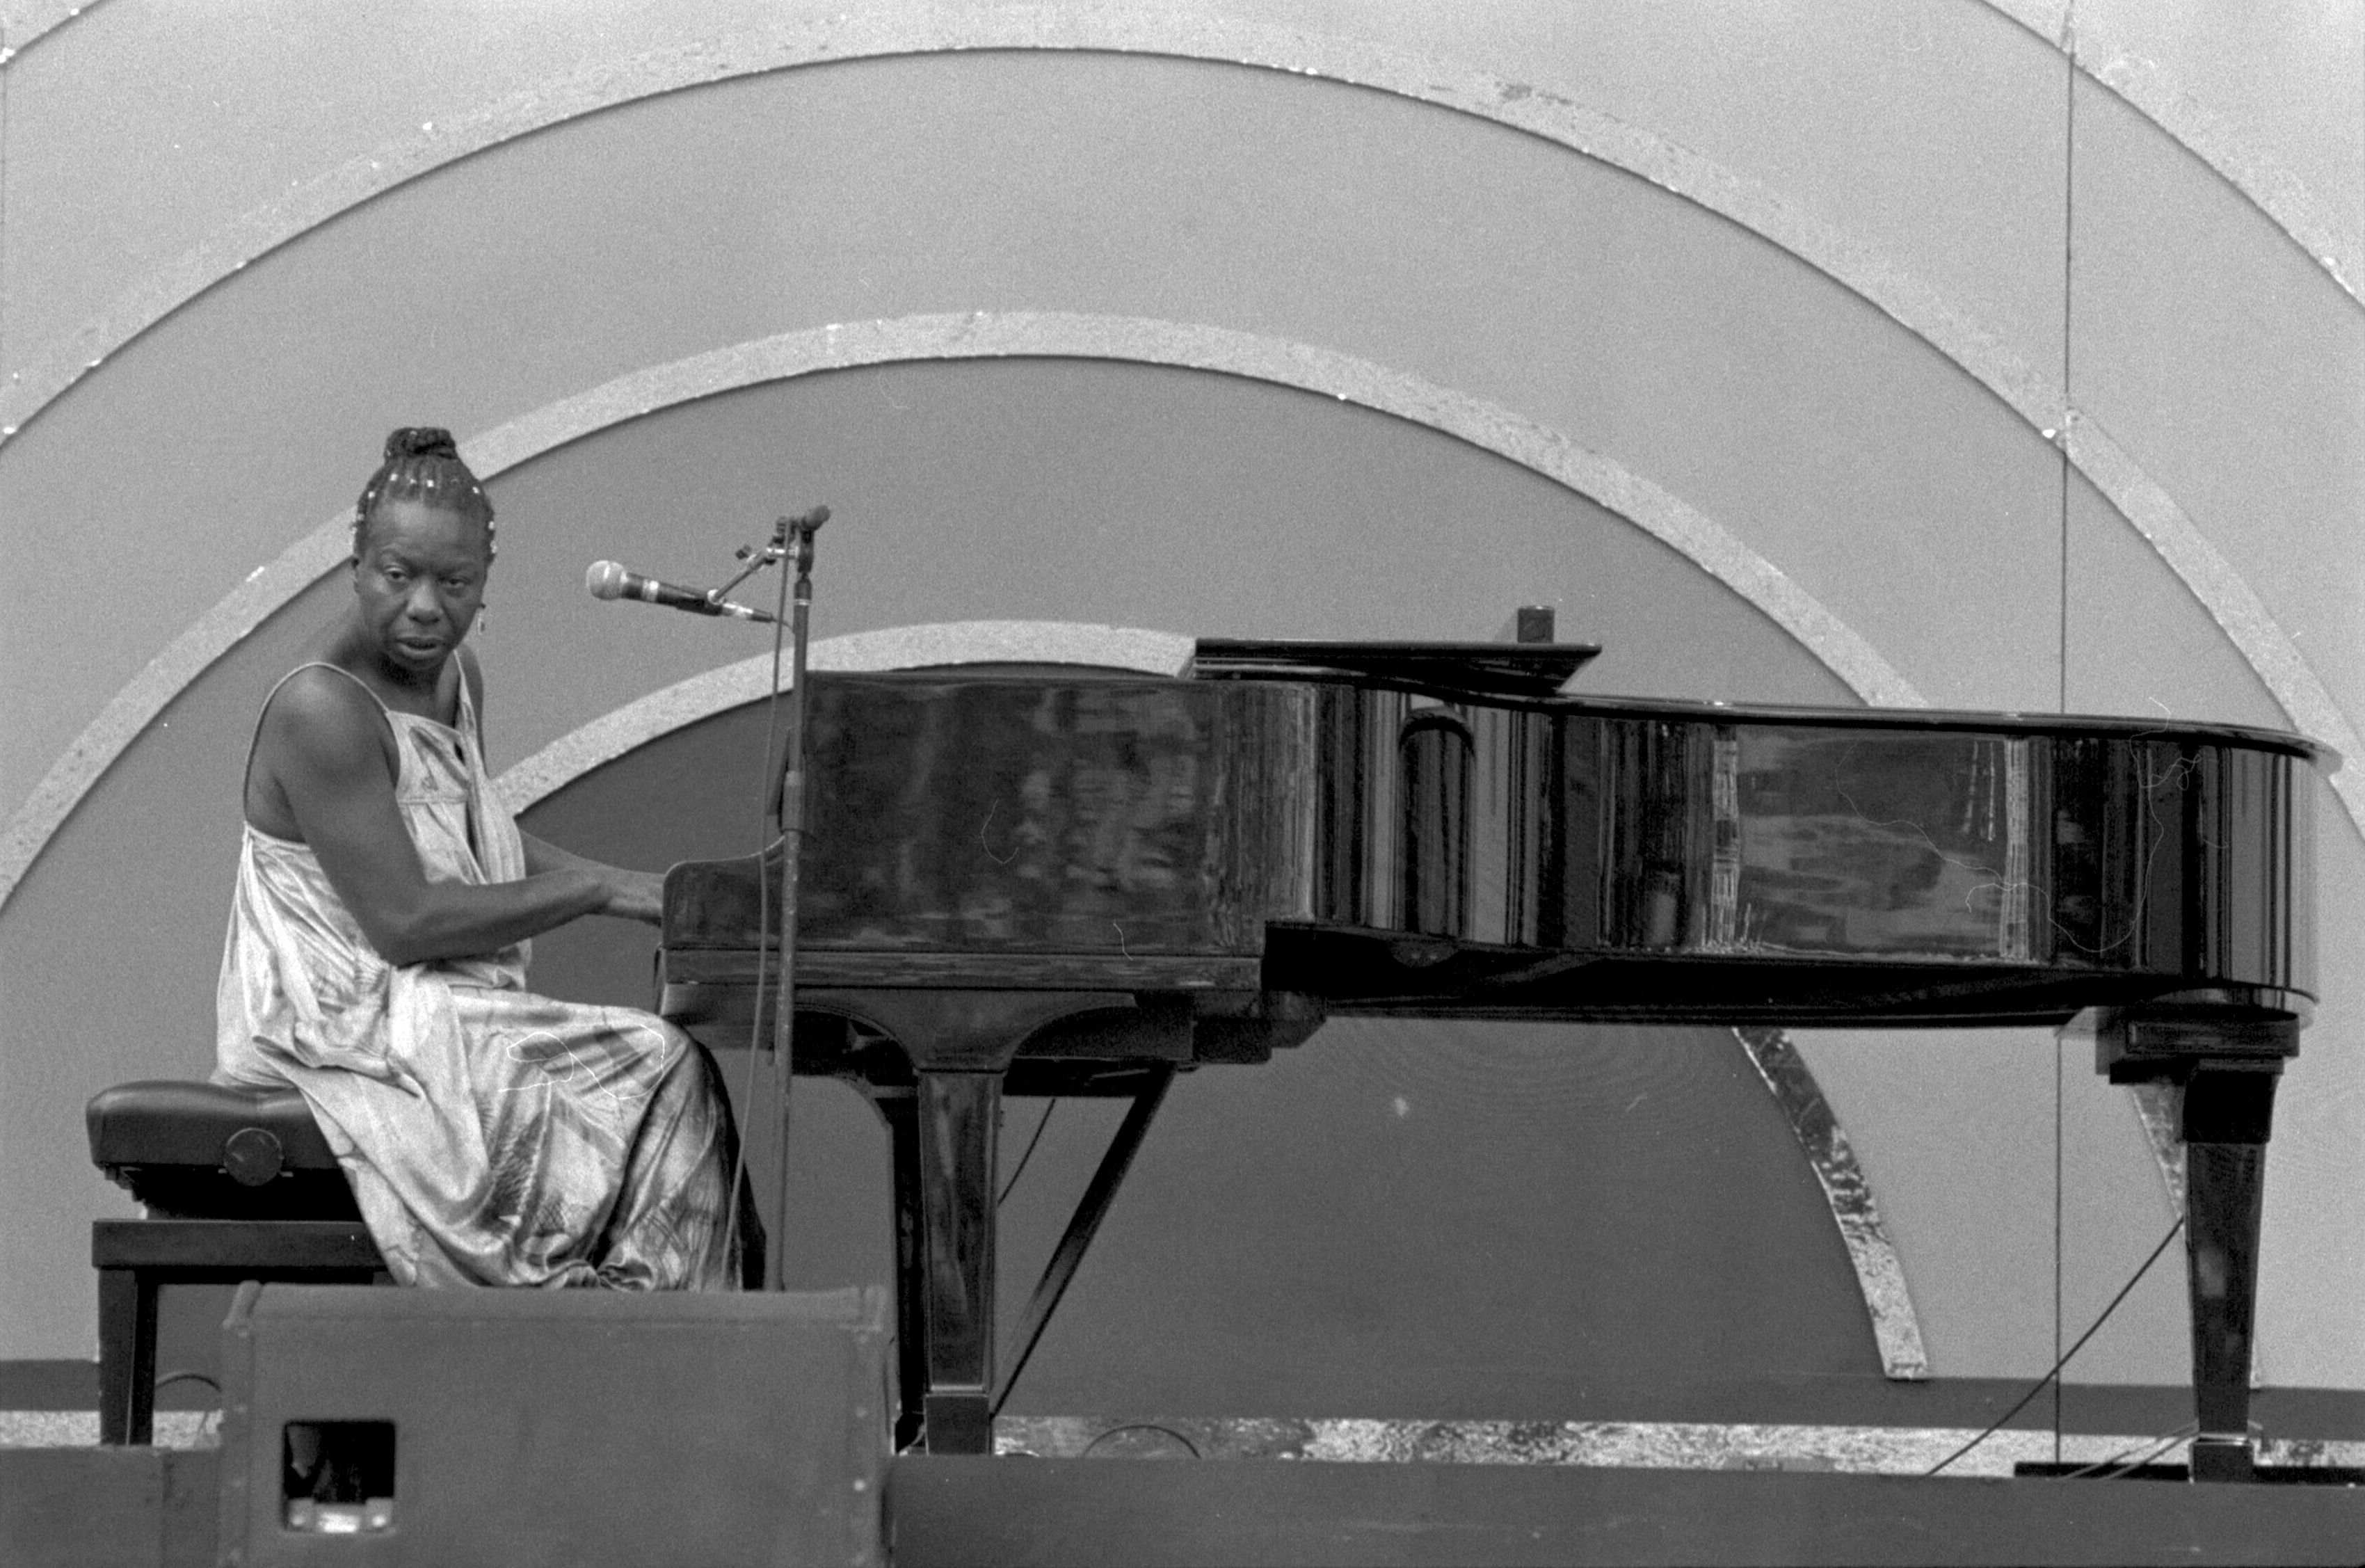  Nina Simone plays piano during the Playboy Jazz Festival at the Hollywood Bowl on June 15, 1986. Image source: Jose Galvez, Los Angeles Times